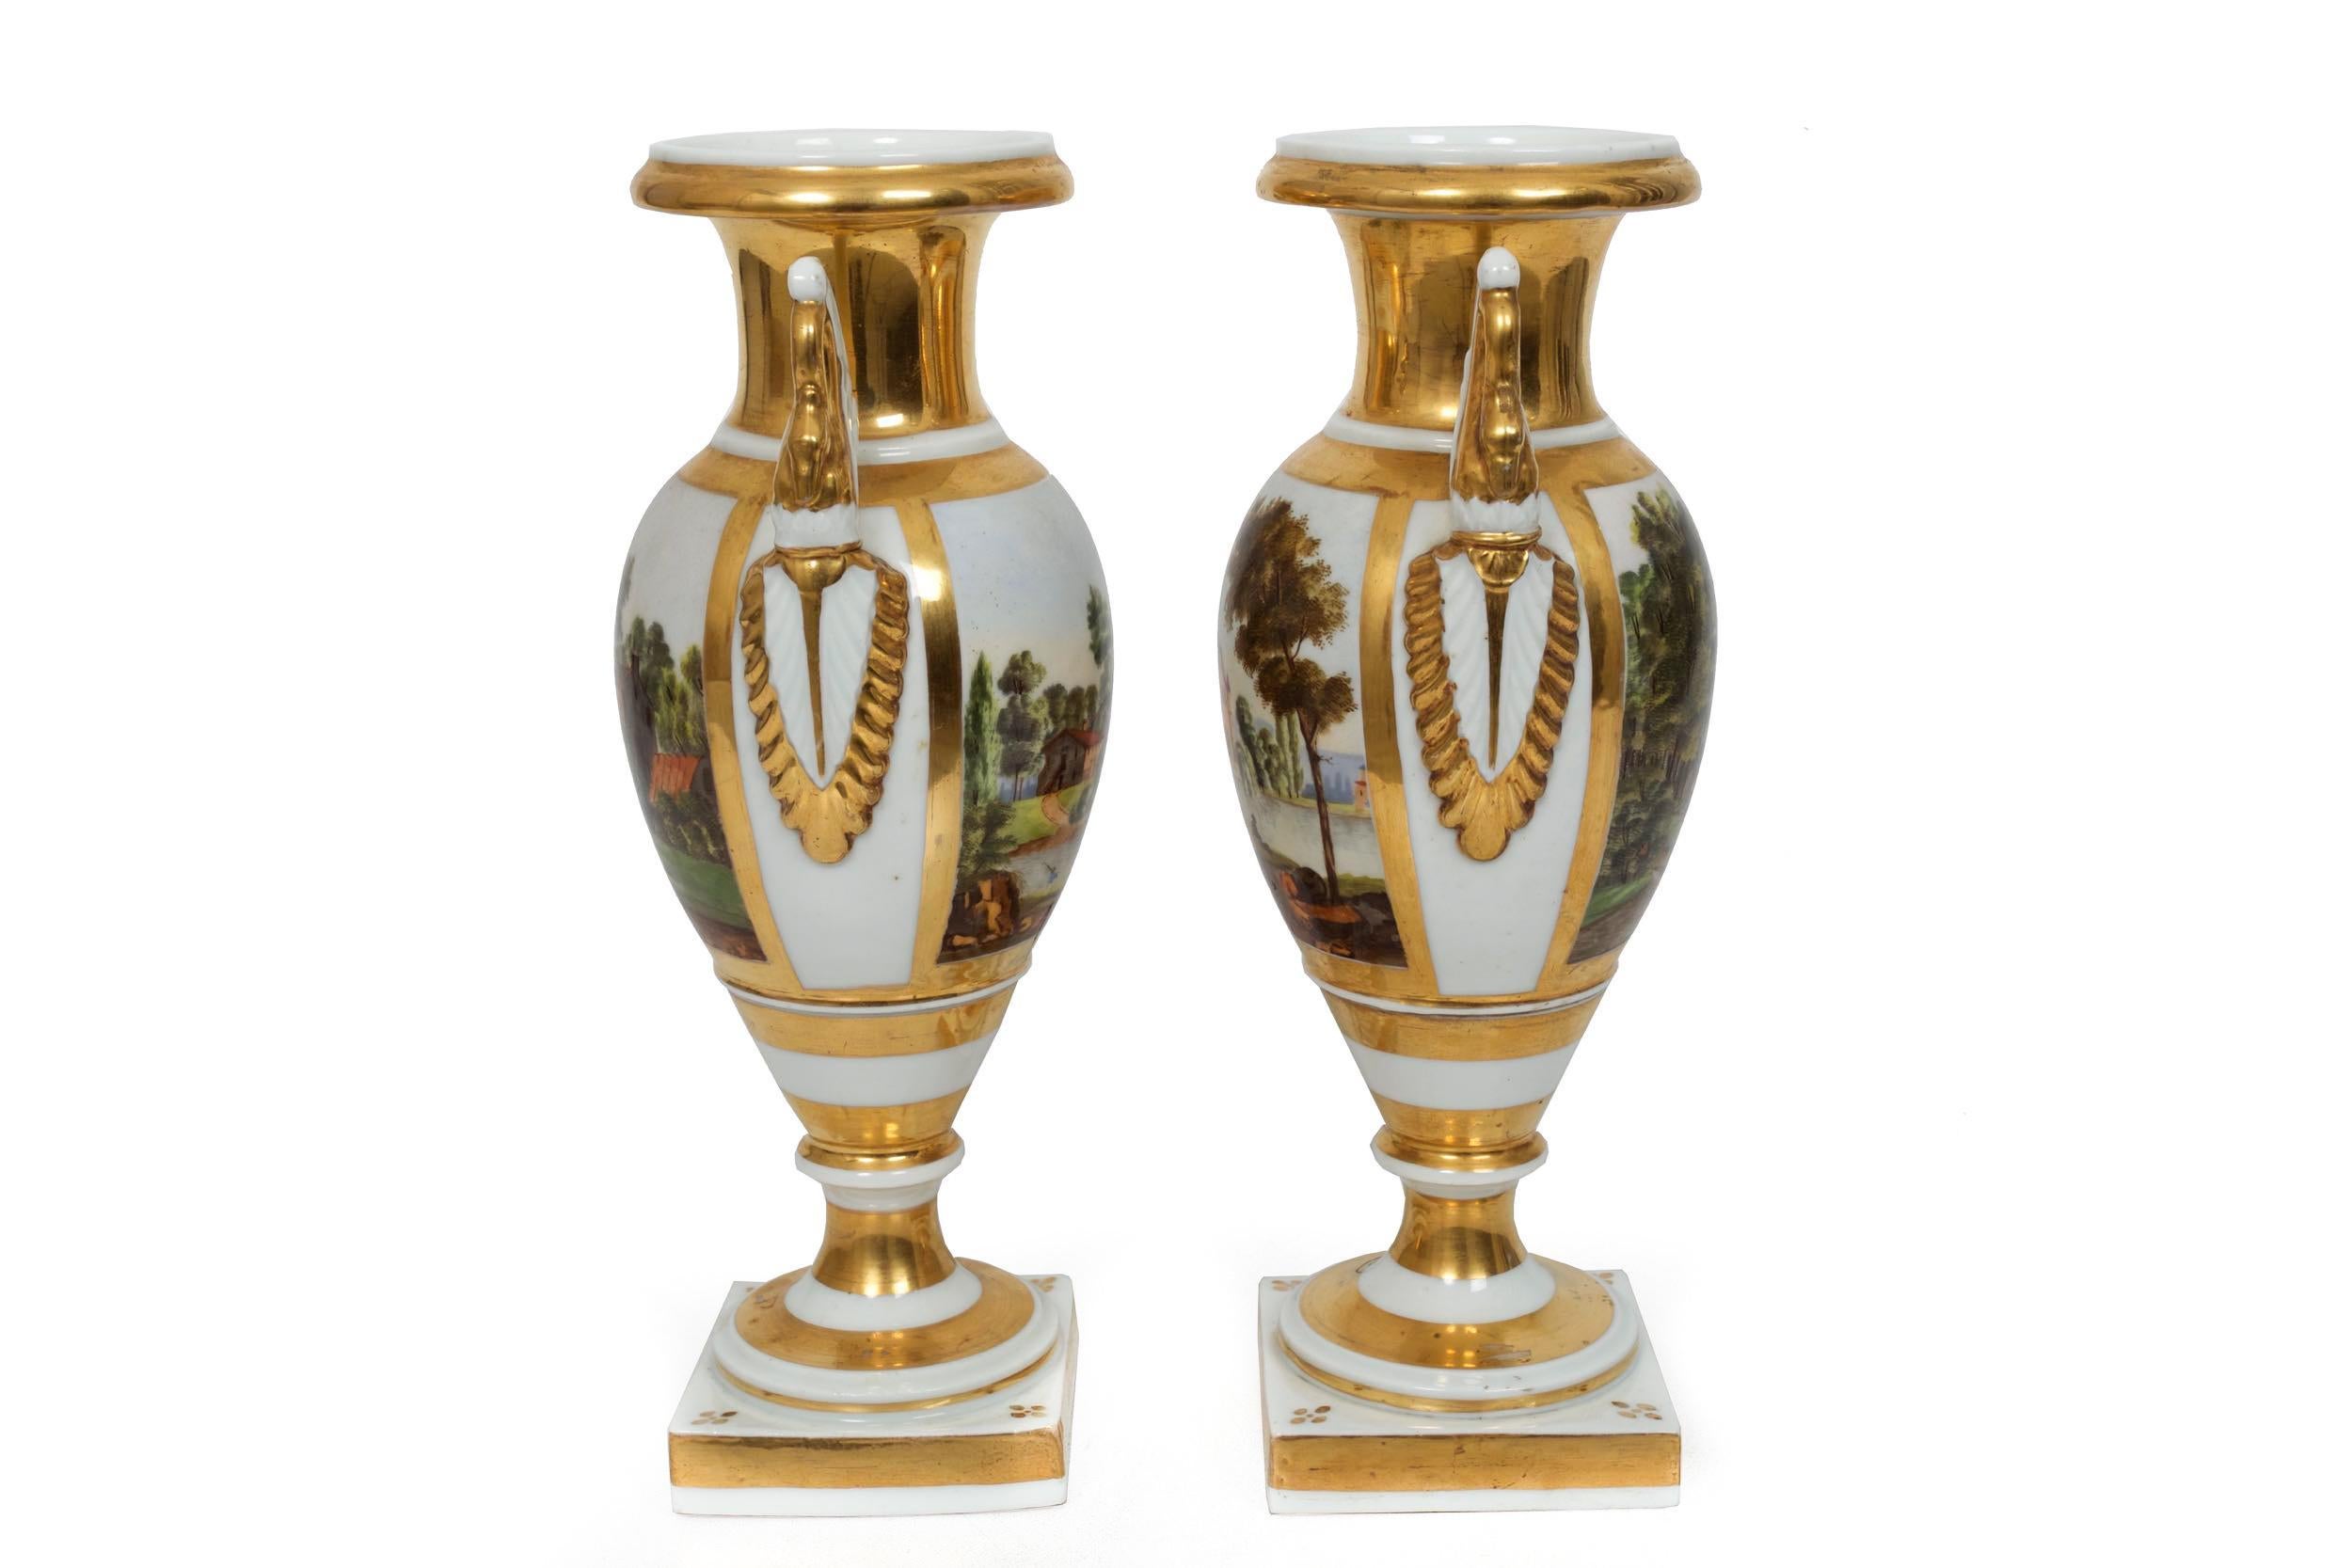 Hand-Painted Pair of French Parisian Painted Porcelain Swan-Form Vases, 19th Century